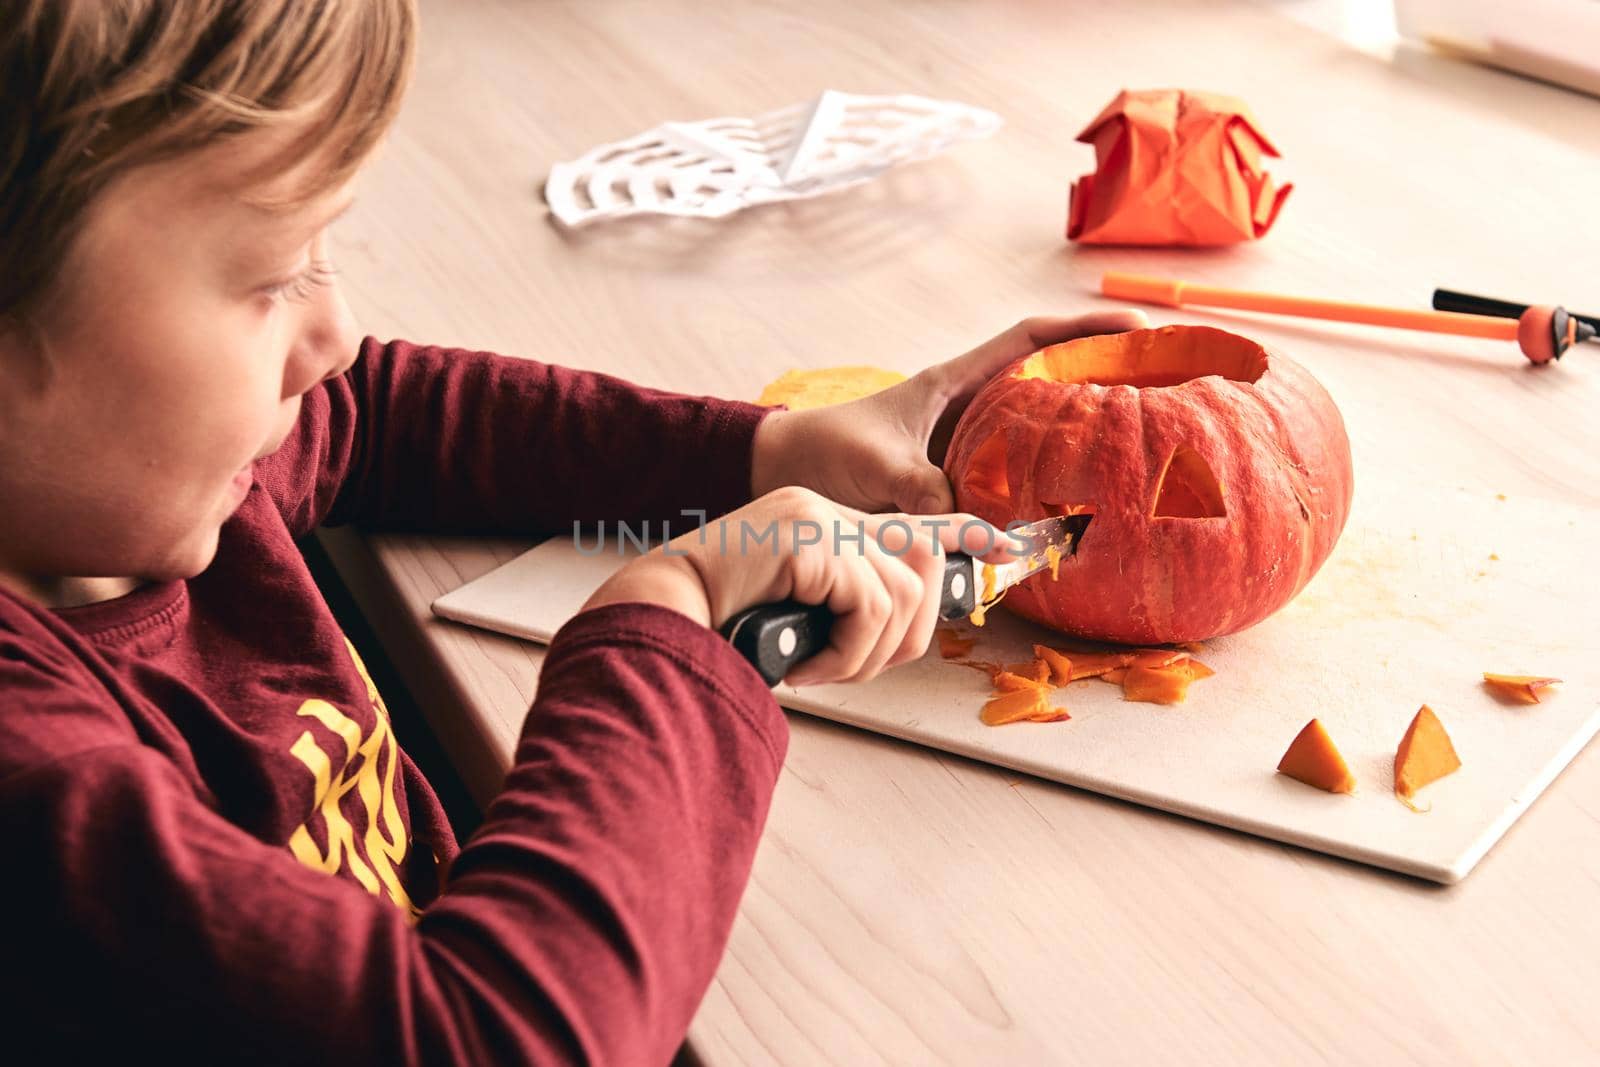 Halloween, decoration and holidays ideas- close up of kid with knife carving pumpkin or jack-o-lantern. 6 years boy has homefamily fun activity. Mom spending time with son together.